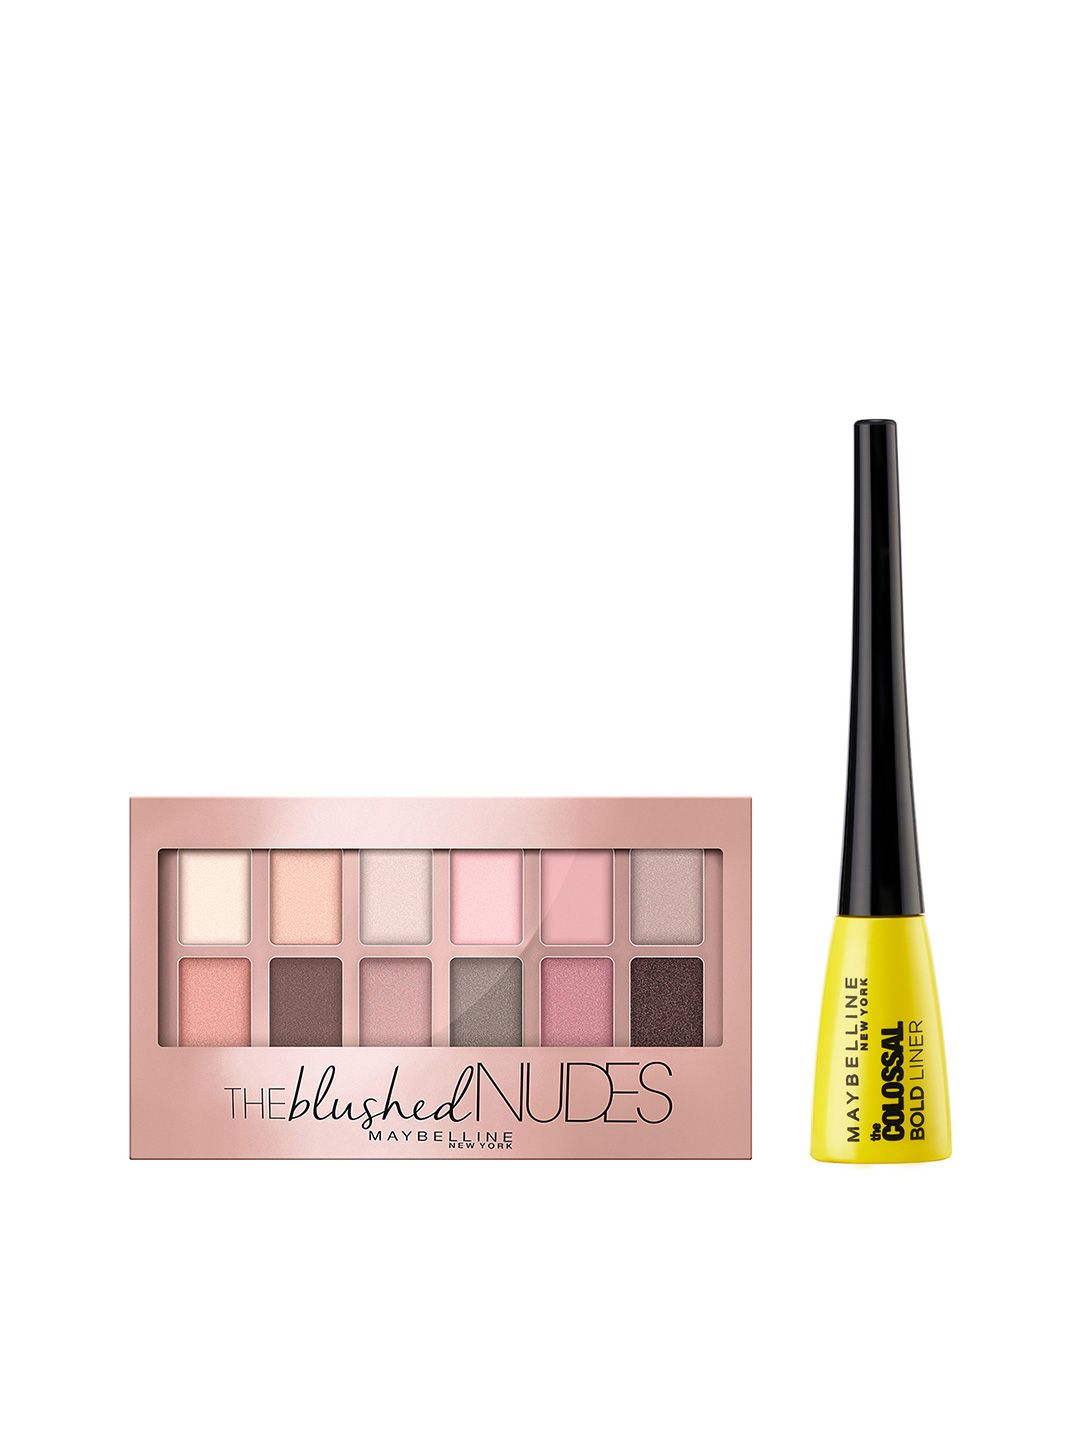 Maybelline Set of New York The Nudes Eyeshadow Palette & Colossal Bold Eyeliner Price in India